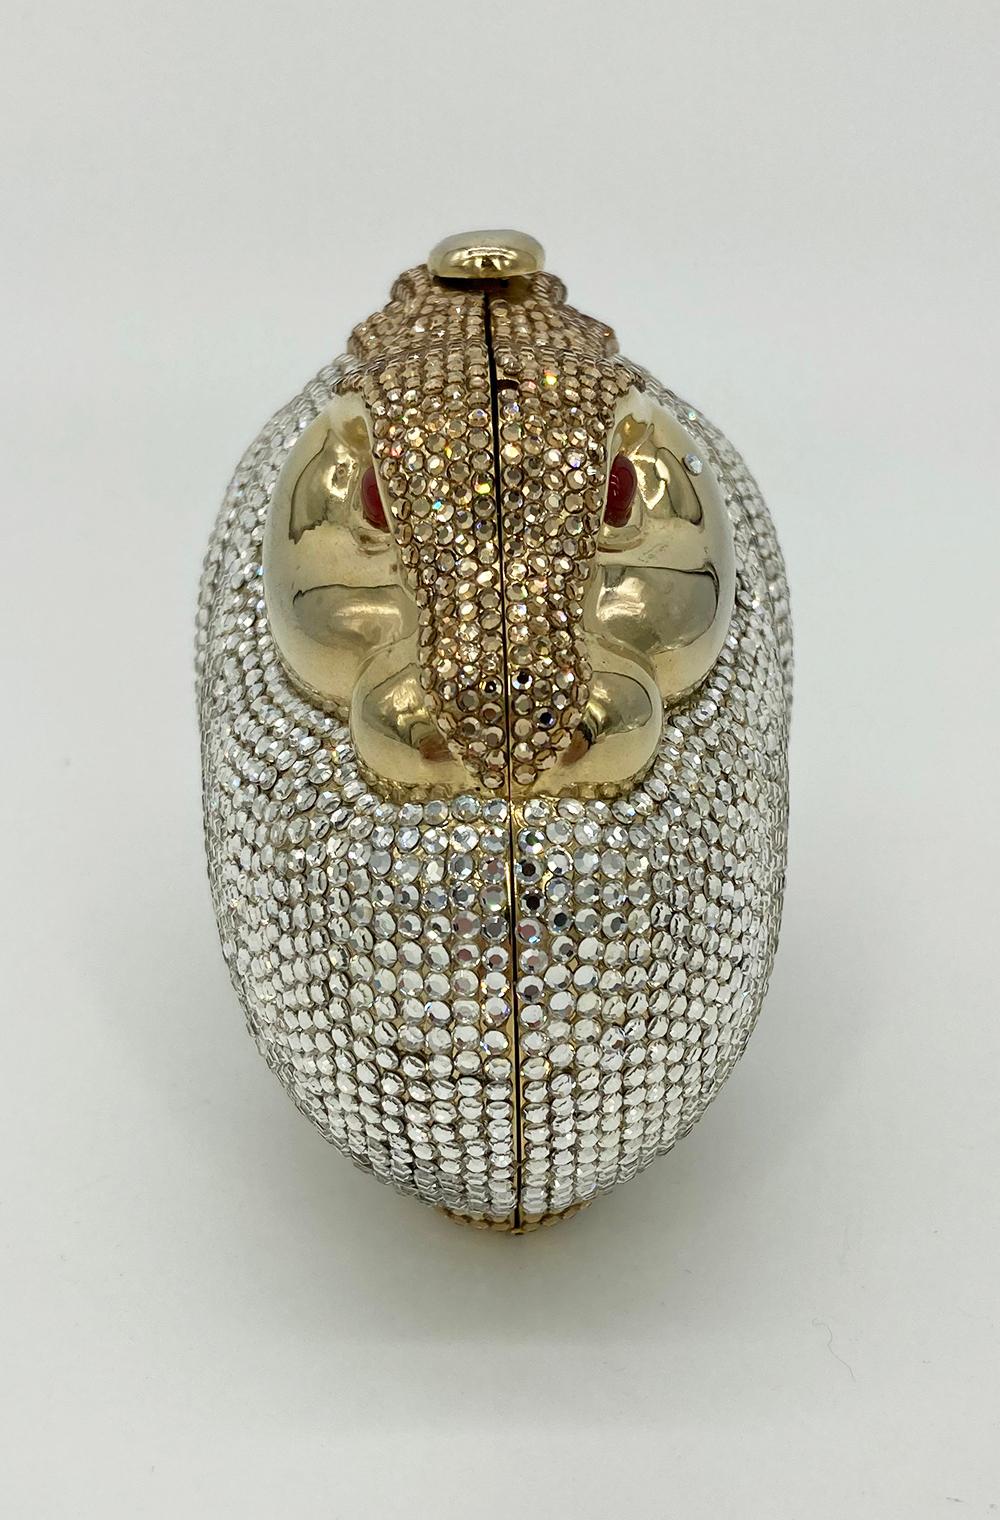 Judith Leiber Swarovski Crystal Bunny Rabbit Minaudiere in excellent condition. Unique and rare rabbit shape with silver cyrstal body, smooth gold face, and gold crystal ears on top. Red cabochon gemstone eyes with one small crystal beauty mark on